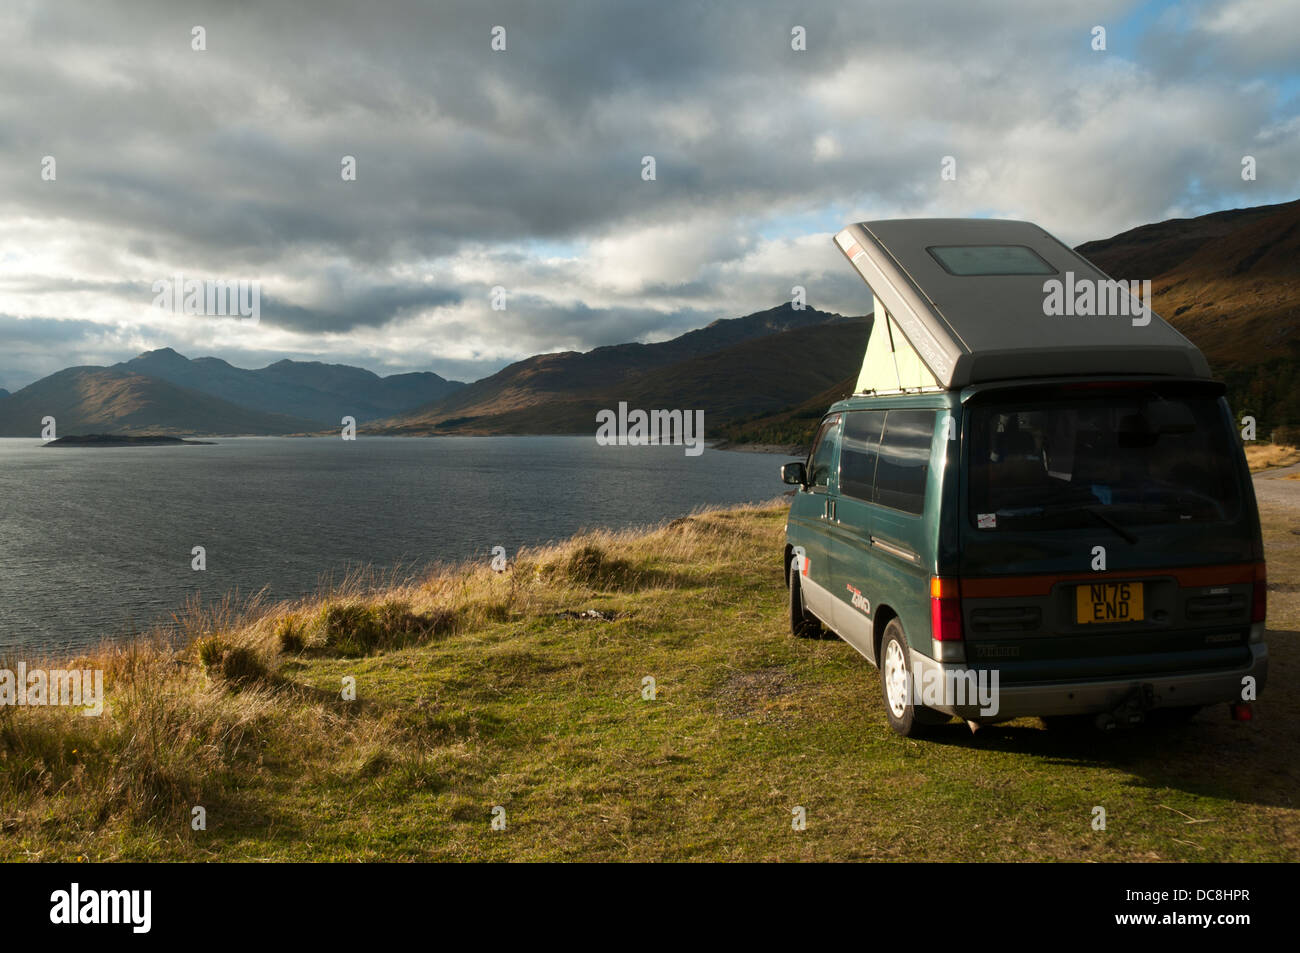 Small motor home camped by Loch Quoich, Highland region, Scotland, UK. The mountains of Knoydart in the distance. Stock Photo